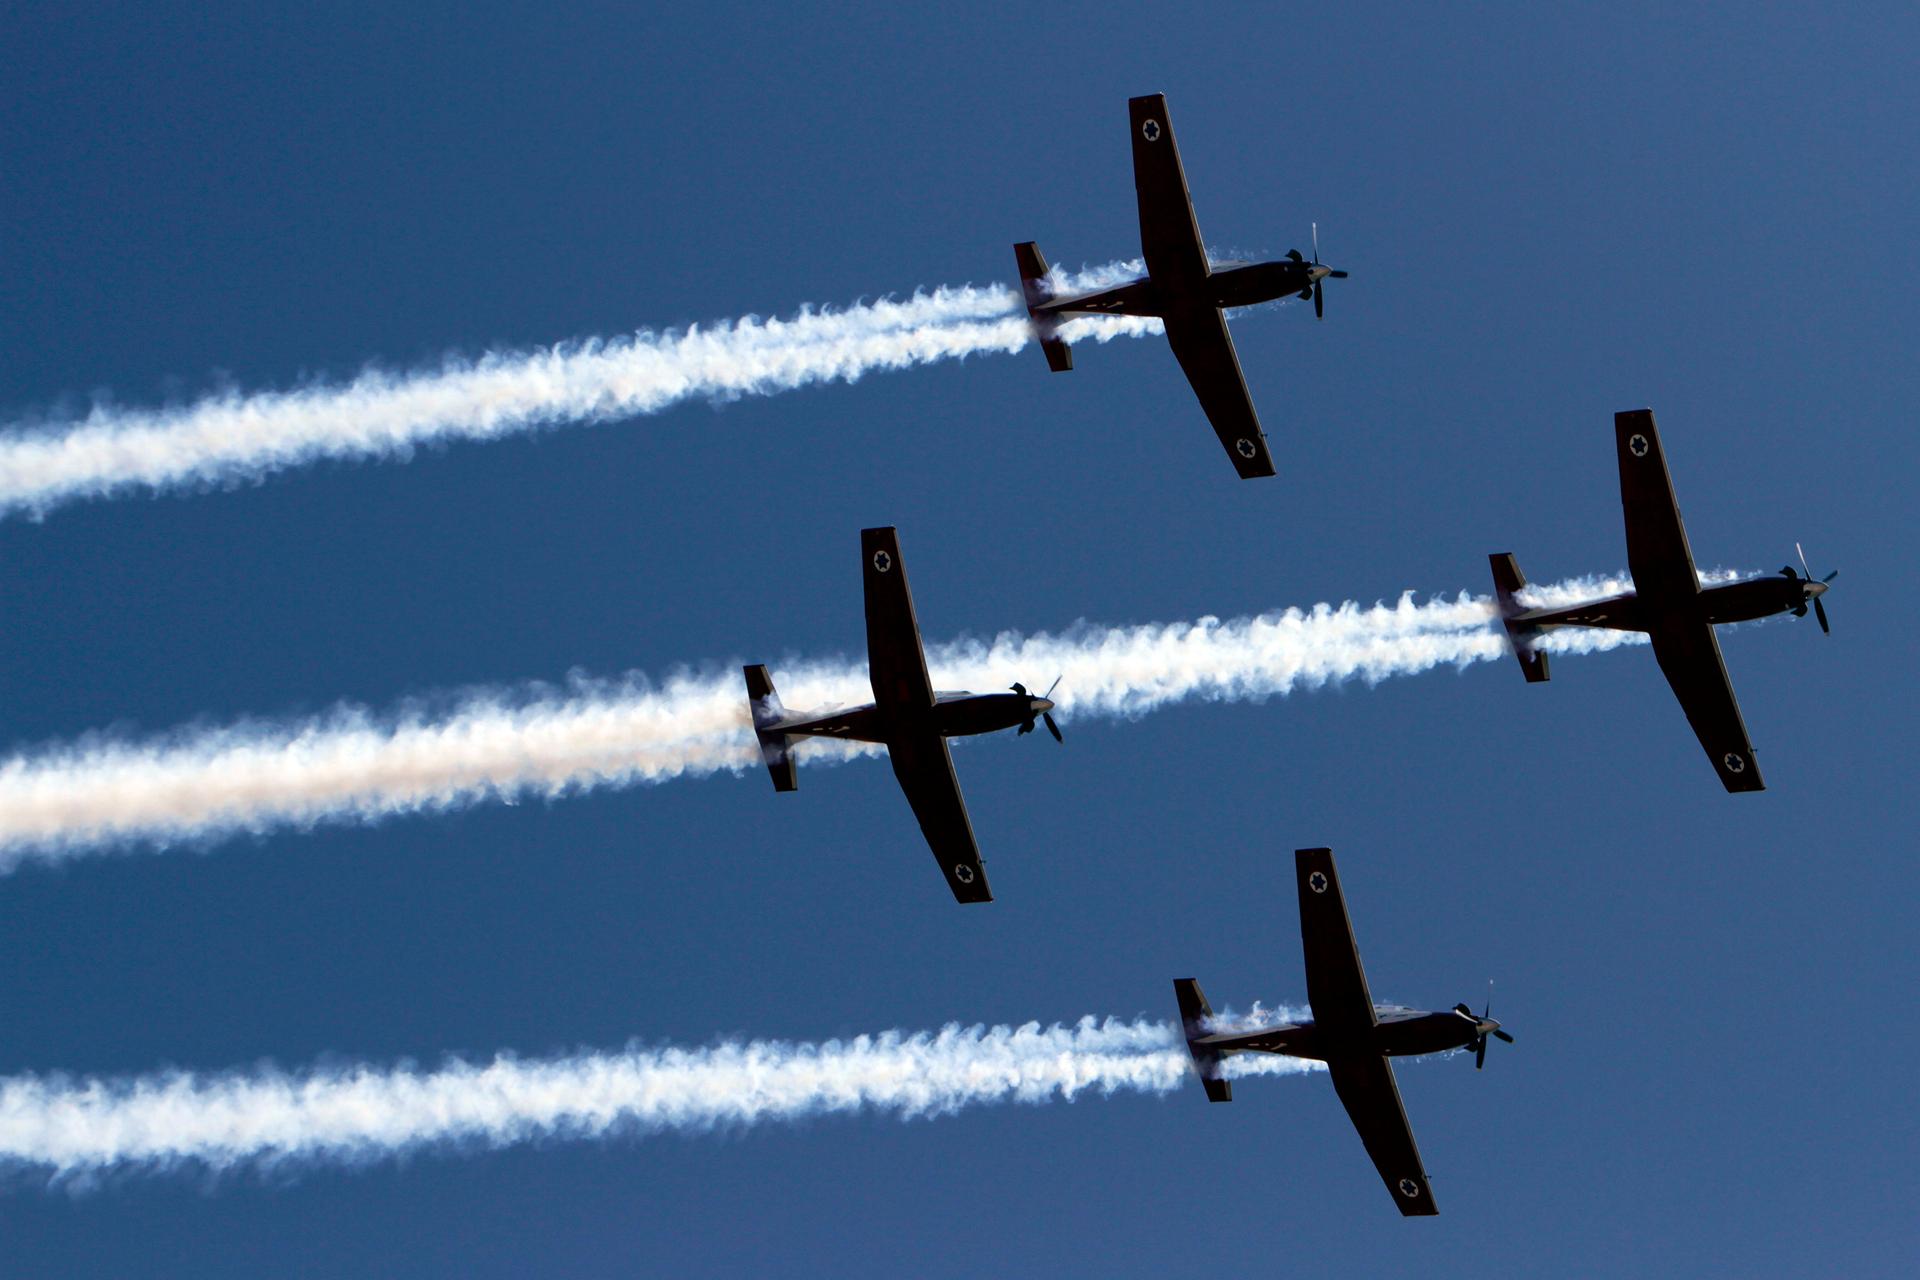 Israeli Air Force planes in formation over Jerusalem during a display for Israeli Independence Day.